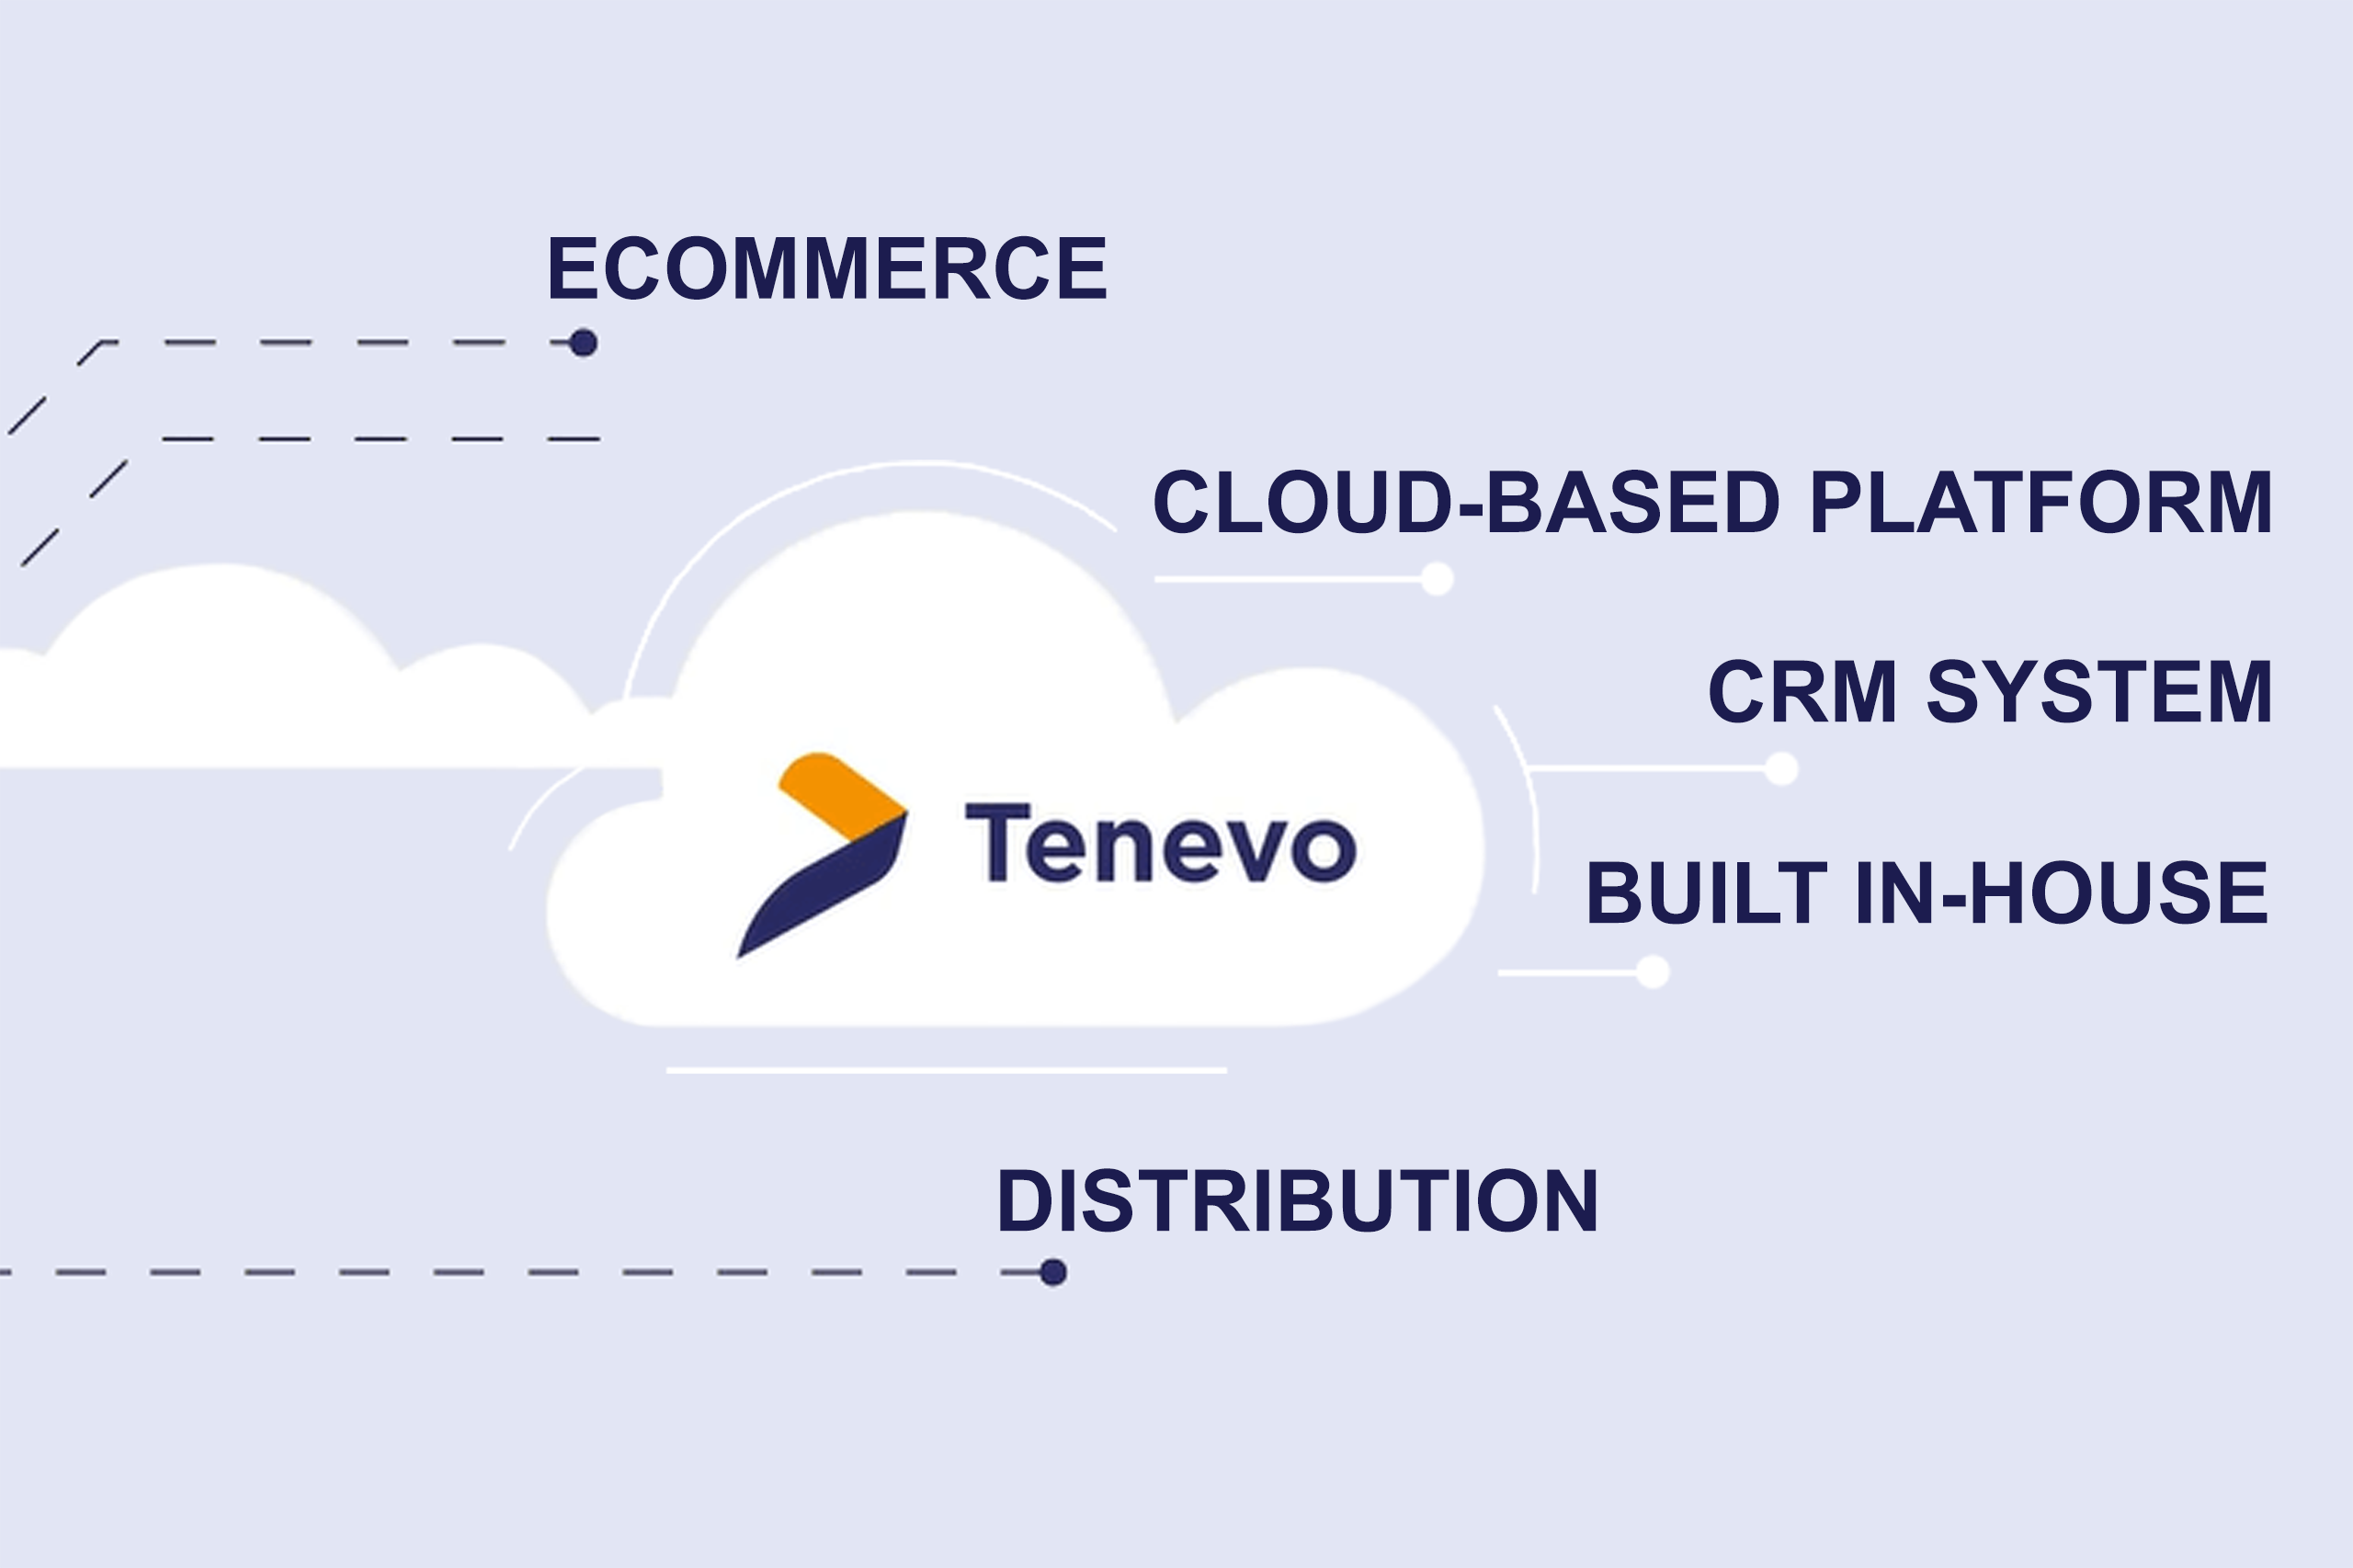 Tenevo - Finishing Line's built in-house, cloud-based CRM system.